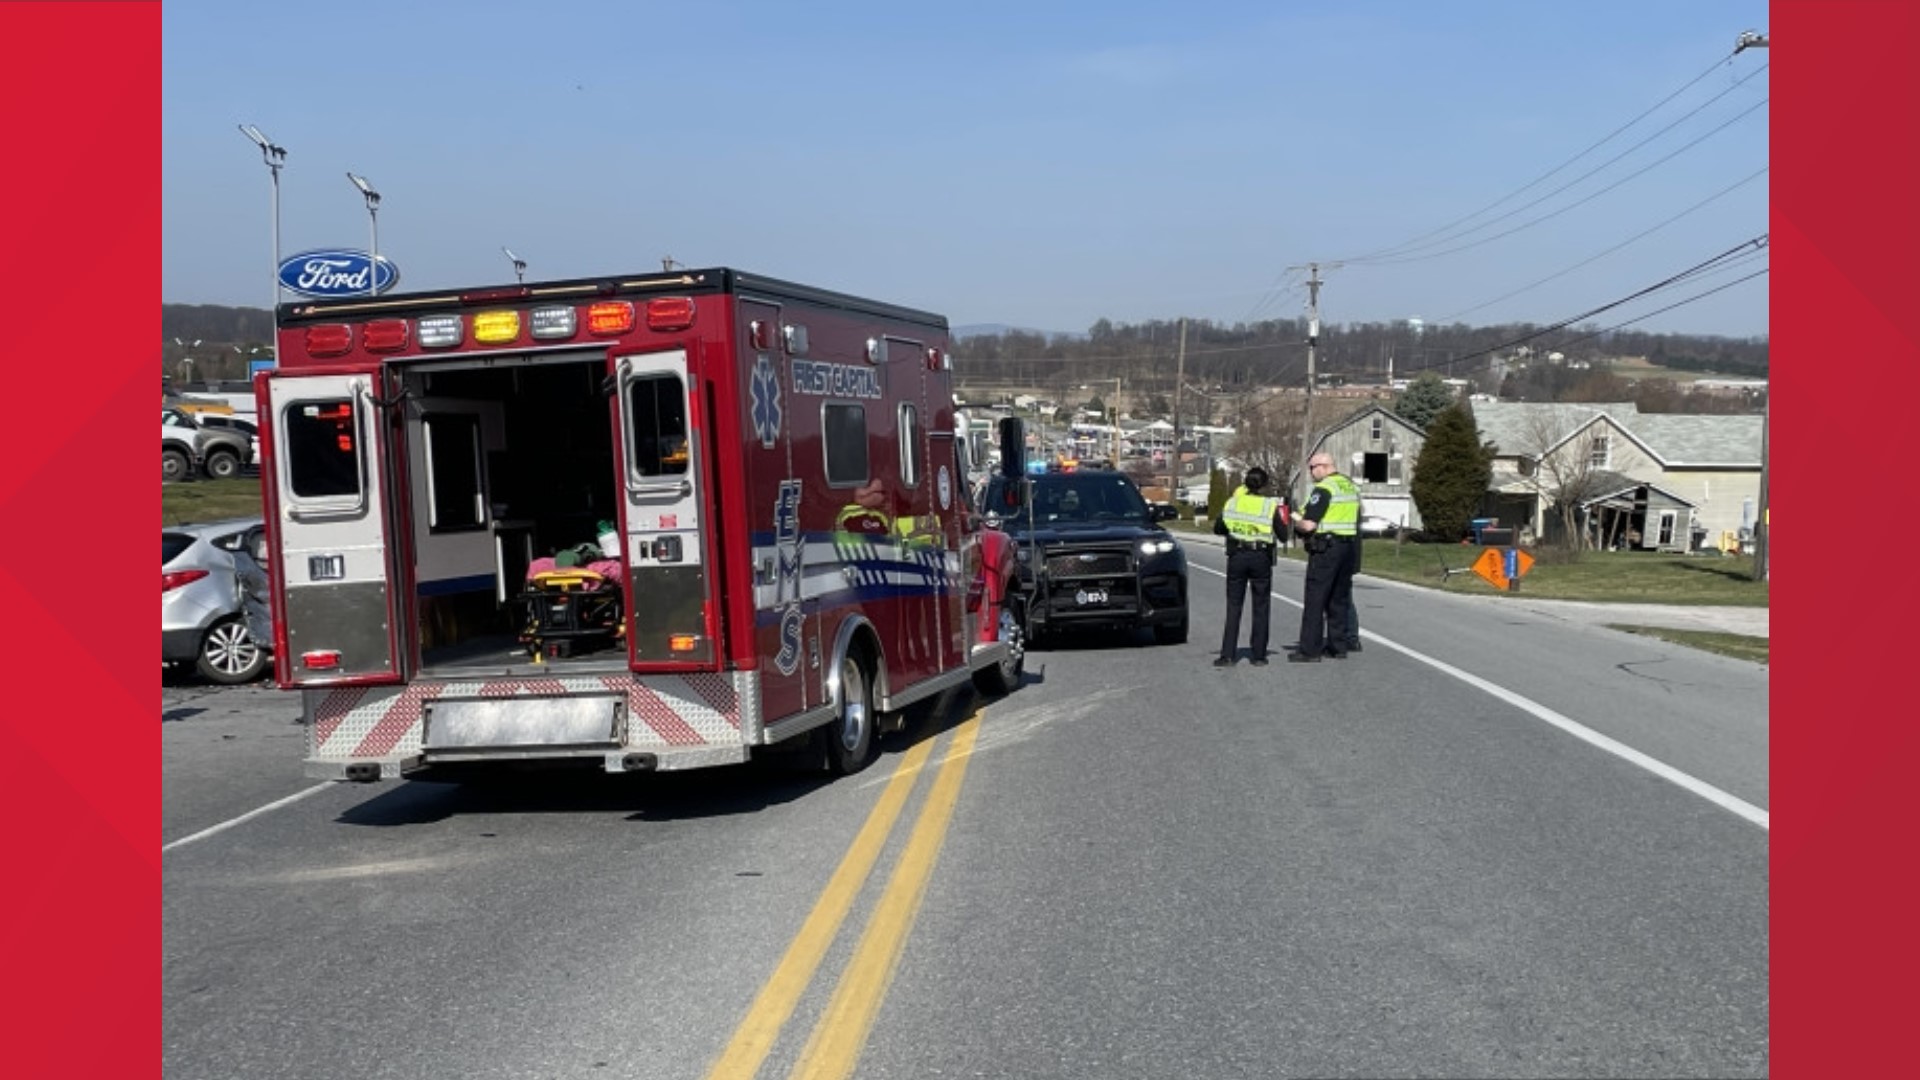 The coroner responded to the scene of a motorcycle crash in York, according to the county's 911 Dispatch.